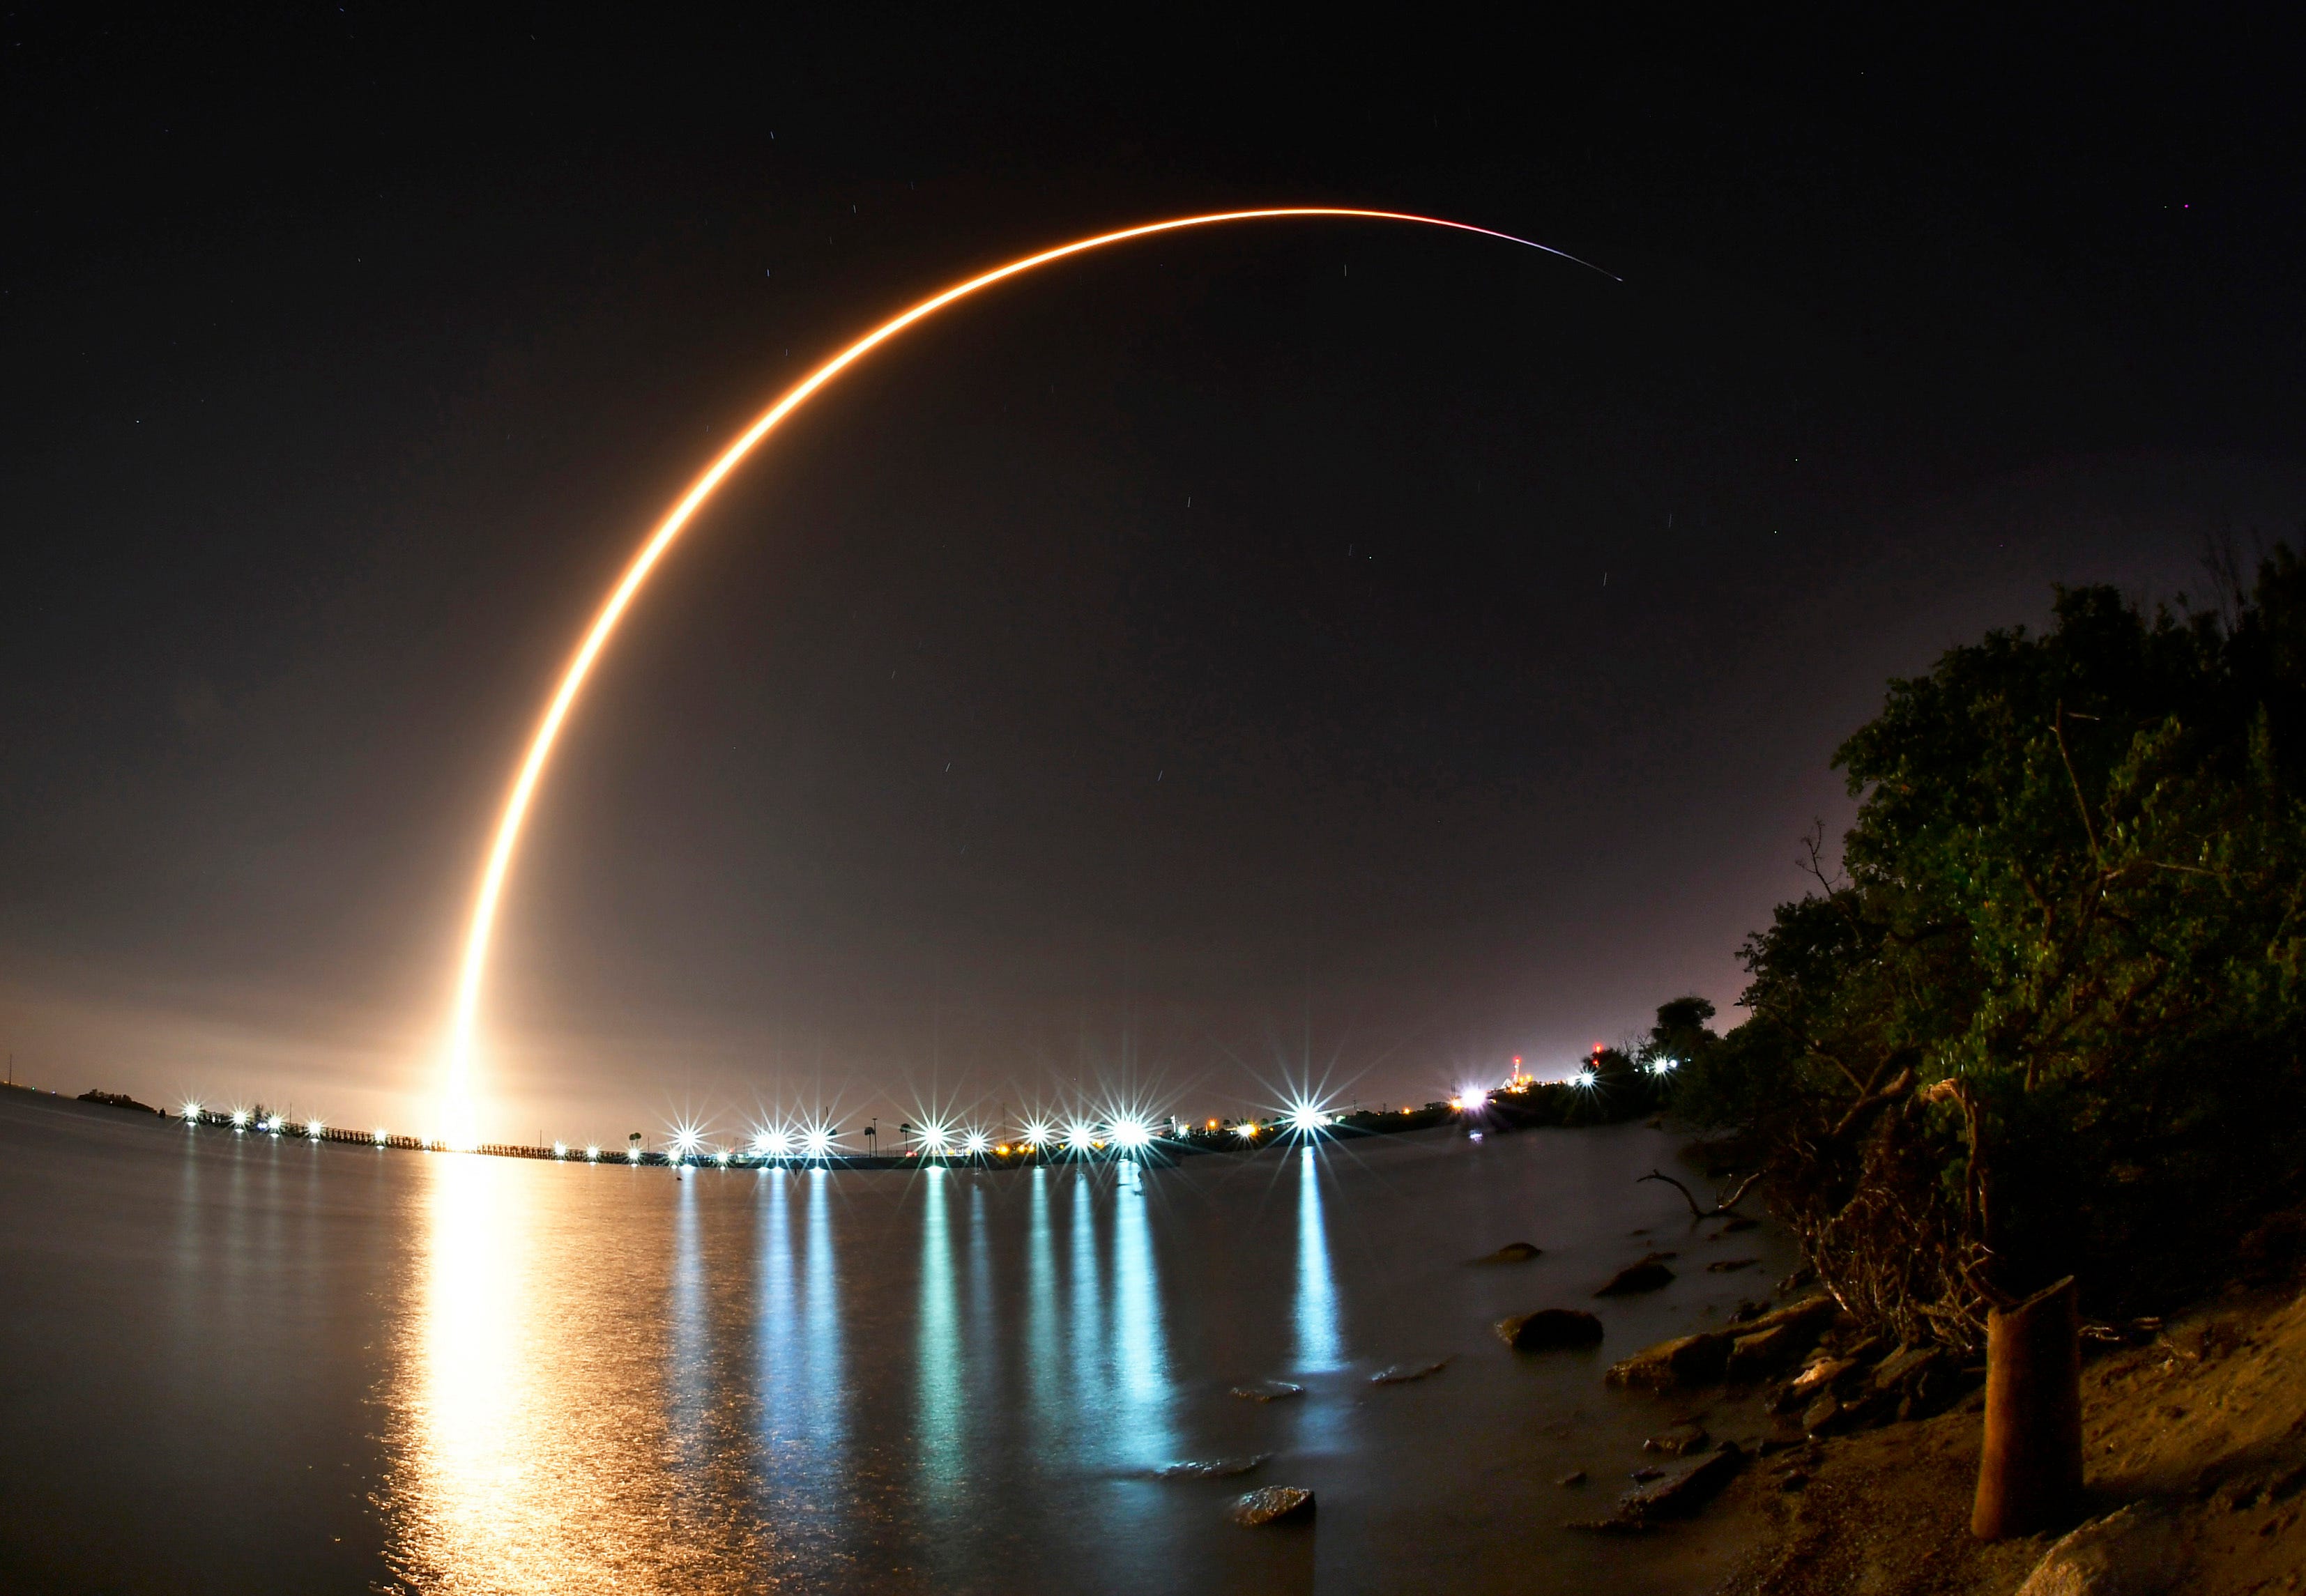 A SpaceX Falcon 9 rocket carrying a Putih/Telkom-4 communications satellite lifts off from Launch Complex 40 at Cape Canaveral Air Force Station, Fla. The images is a 147-second time exposure of the launch with the lights of the Canaveral Lock in the